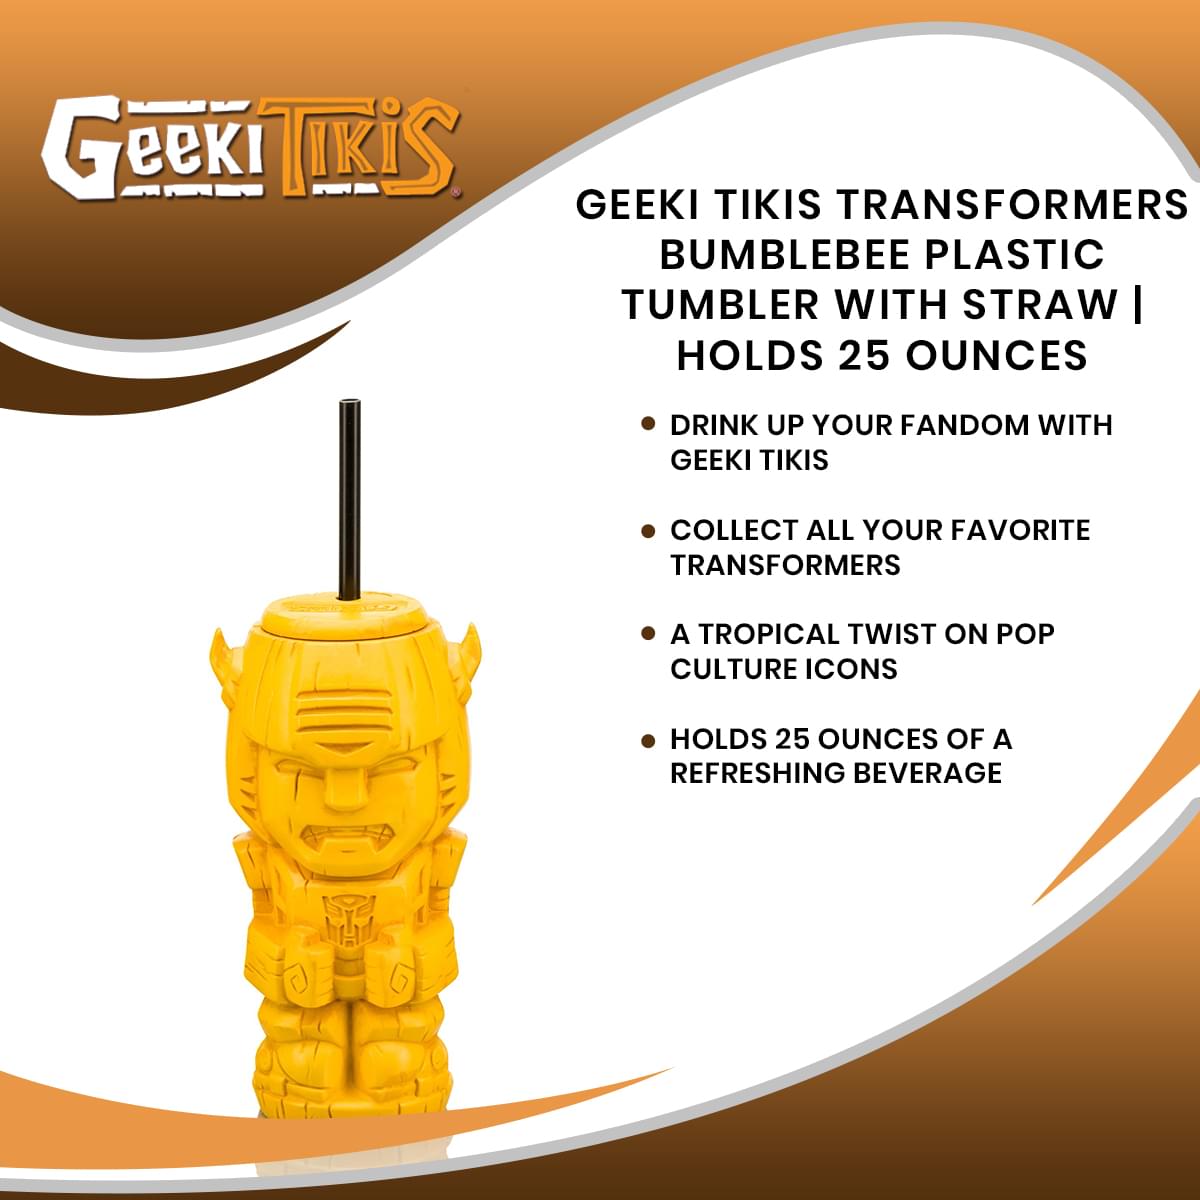 Geeki Tikis Transformers Bumblebee Plastic Tumbler with Straw | Holds 25 Ounces